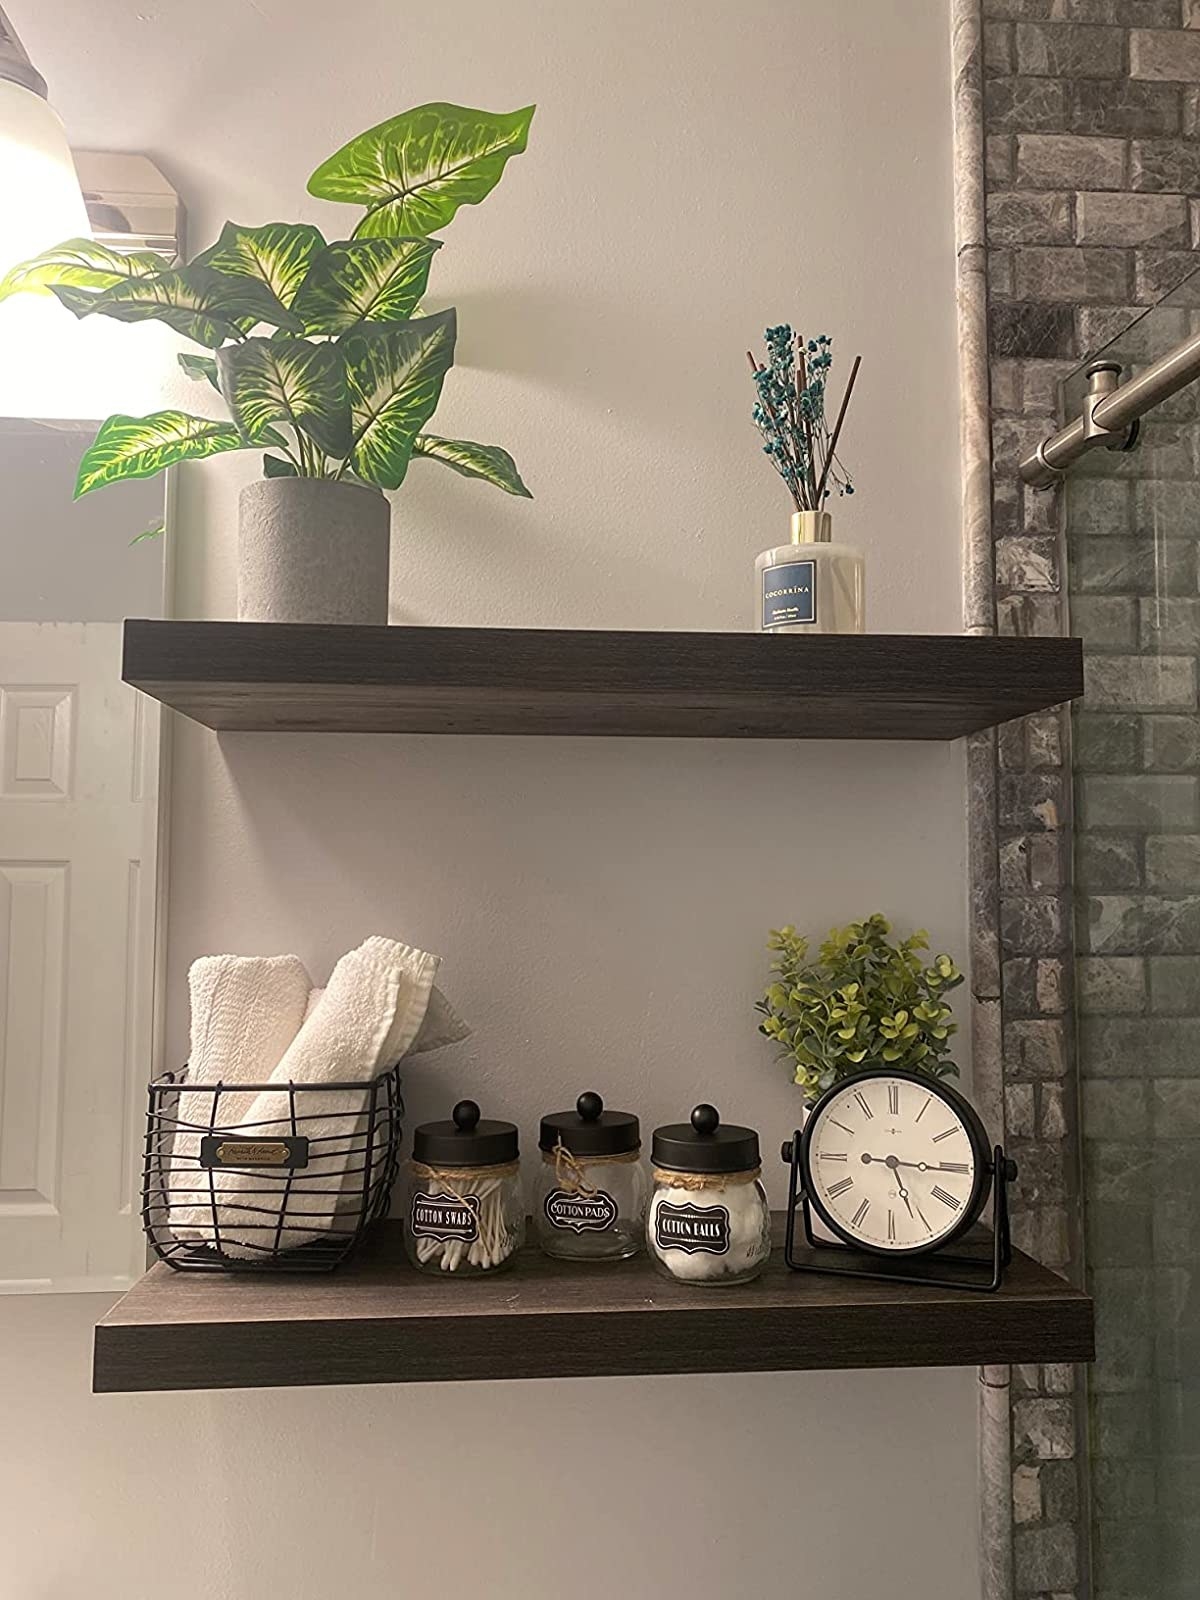 Reviewer image of two floating shelves in their bathroom